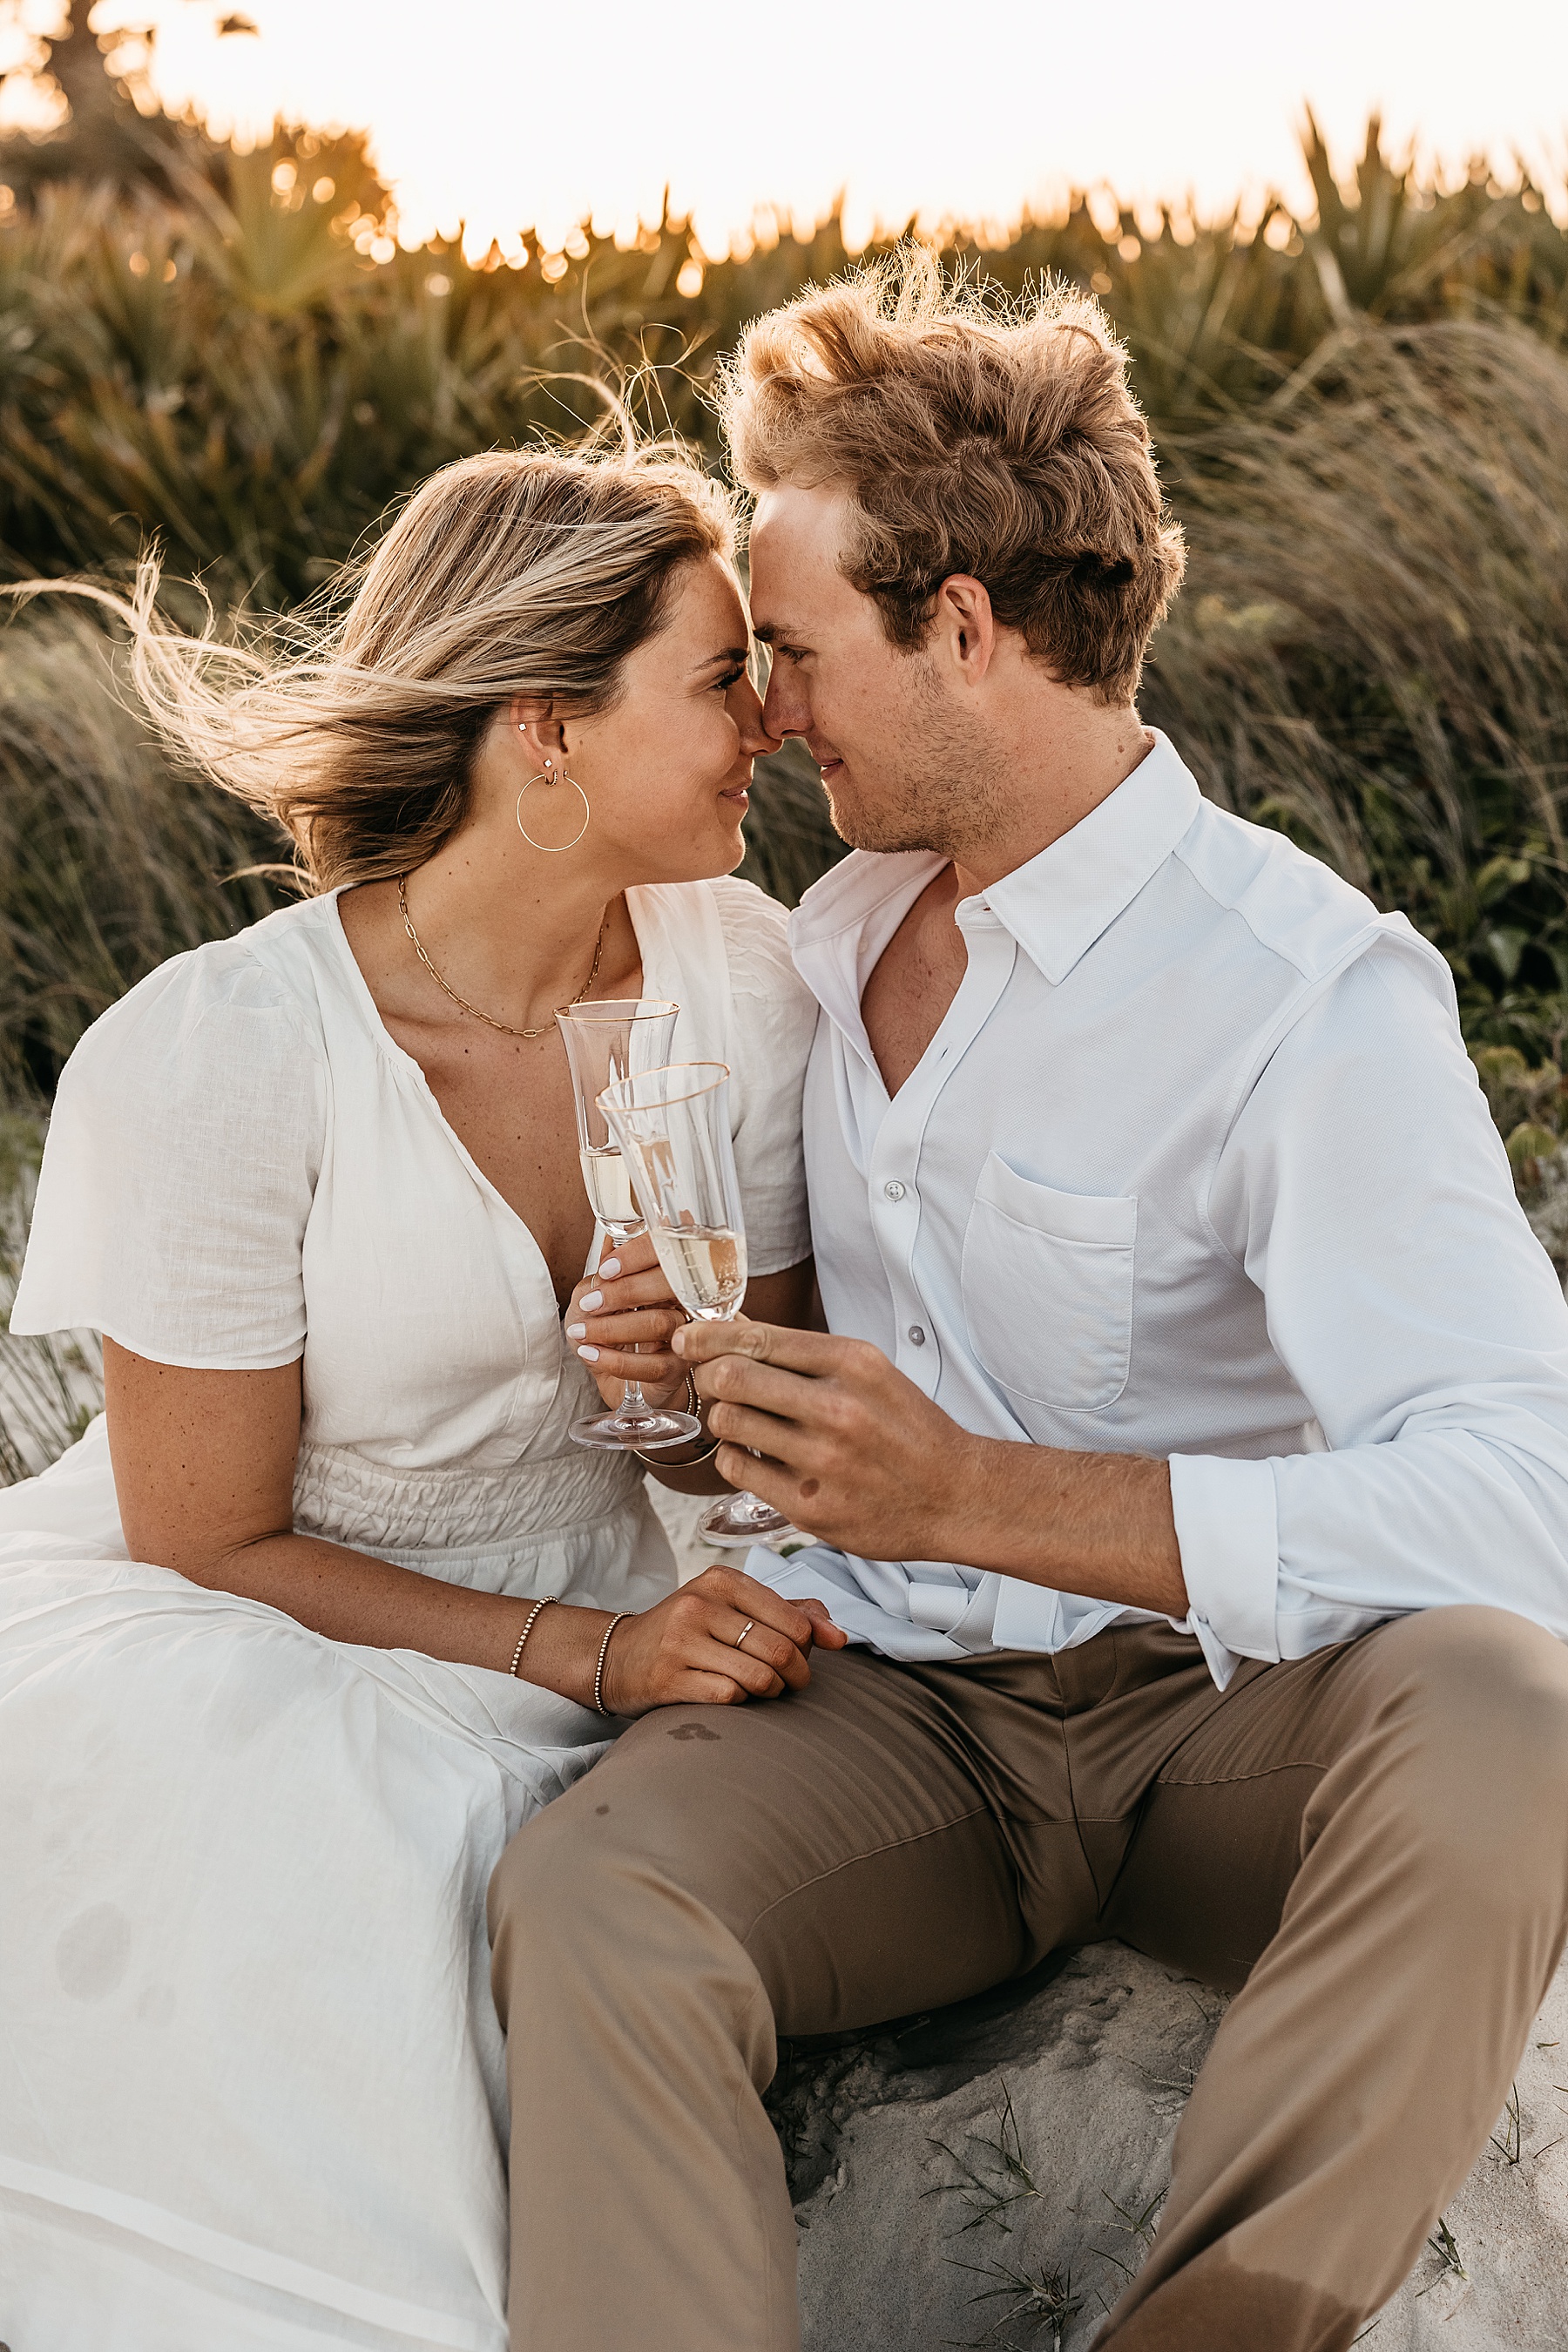 blond haired woman in long white dress snuggling man in khaki pants on the sand holding champagne